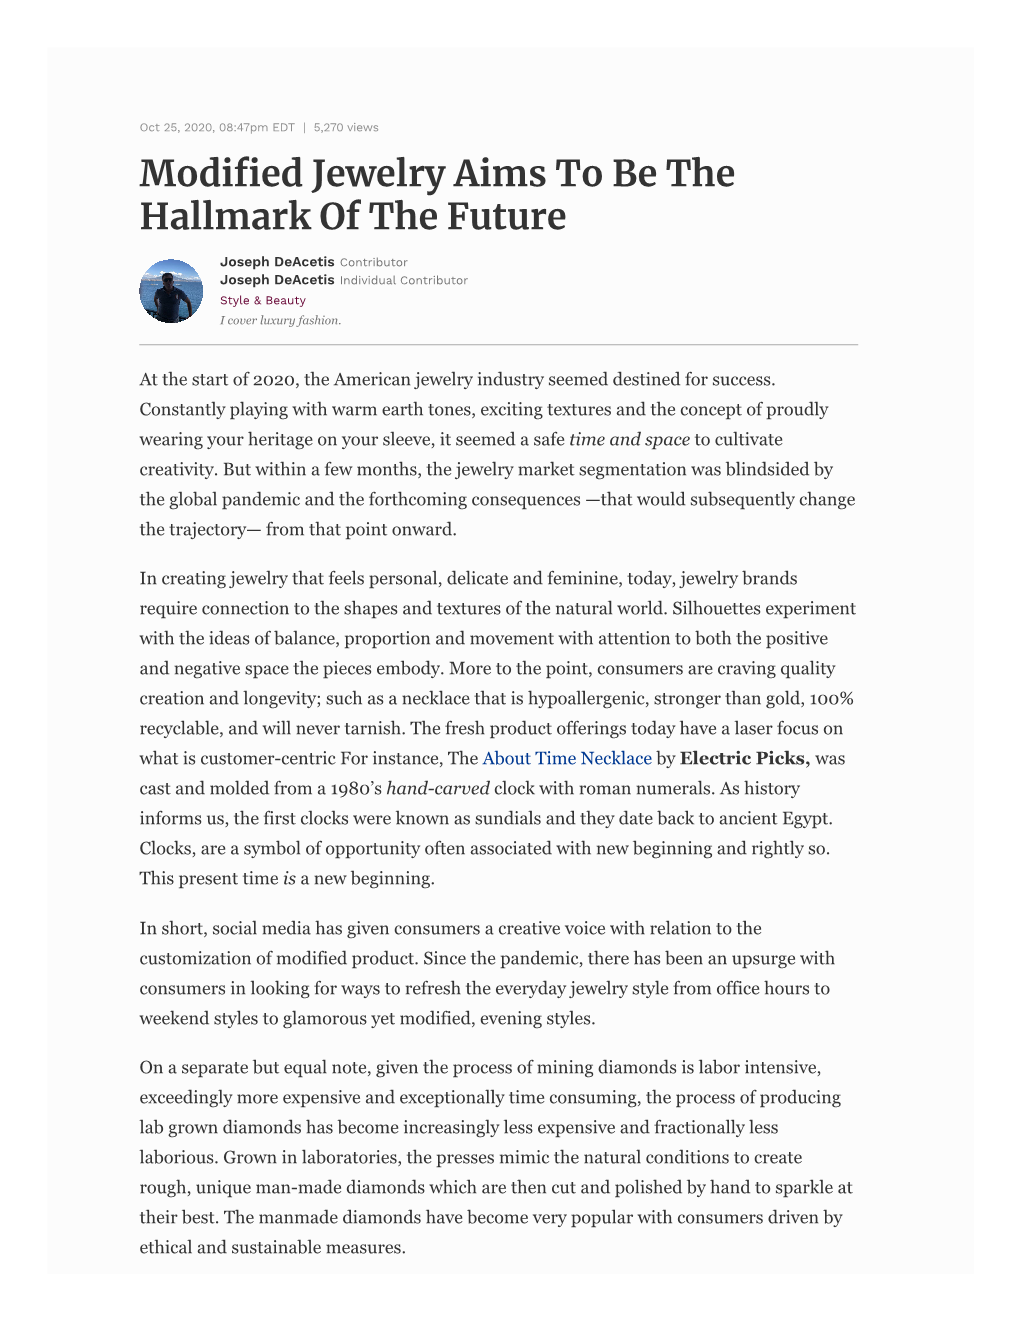 Modified Jewelry Aims to Be the Hallmark of the Future